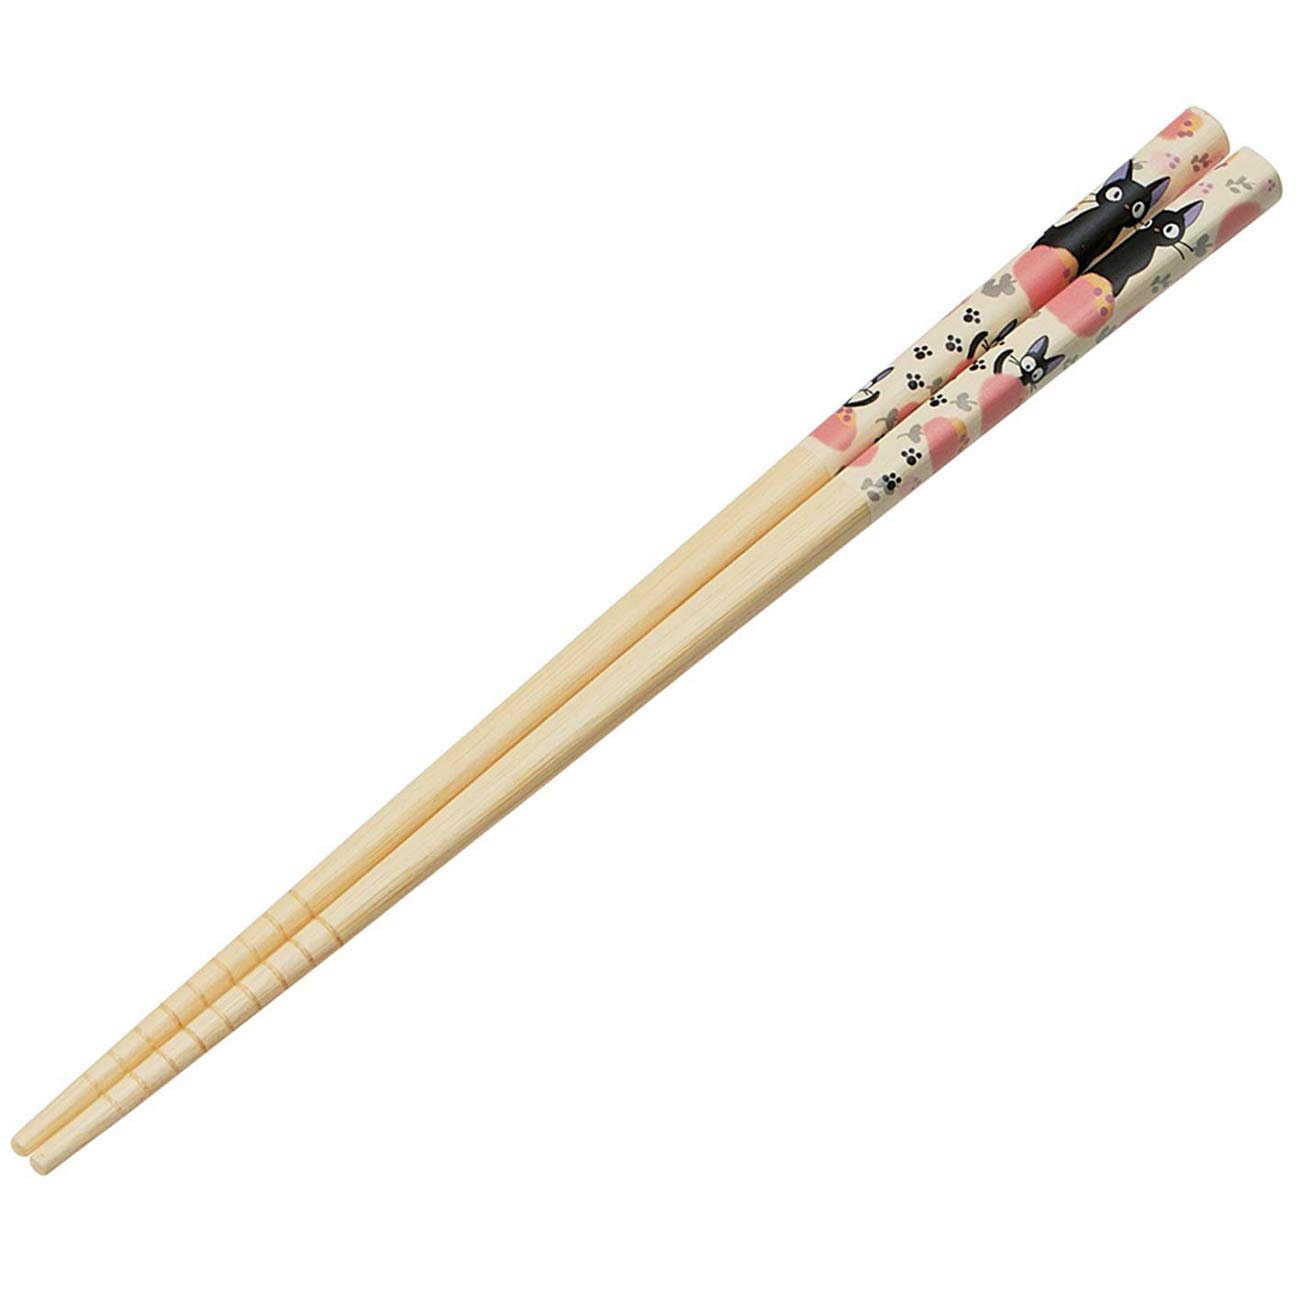 Kiki's Delivery Service Bamboo Chopstick -Anti-Slip Grip for Ease of Use - Authentic Japanese Design - Lightweight, Durable and Convenient - Footprints